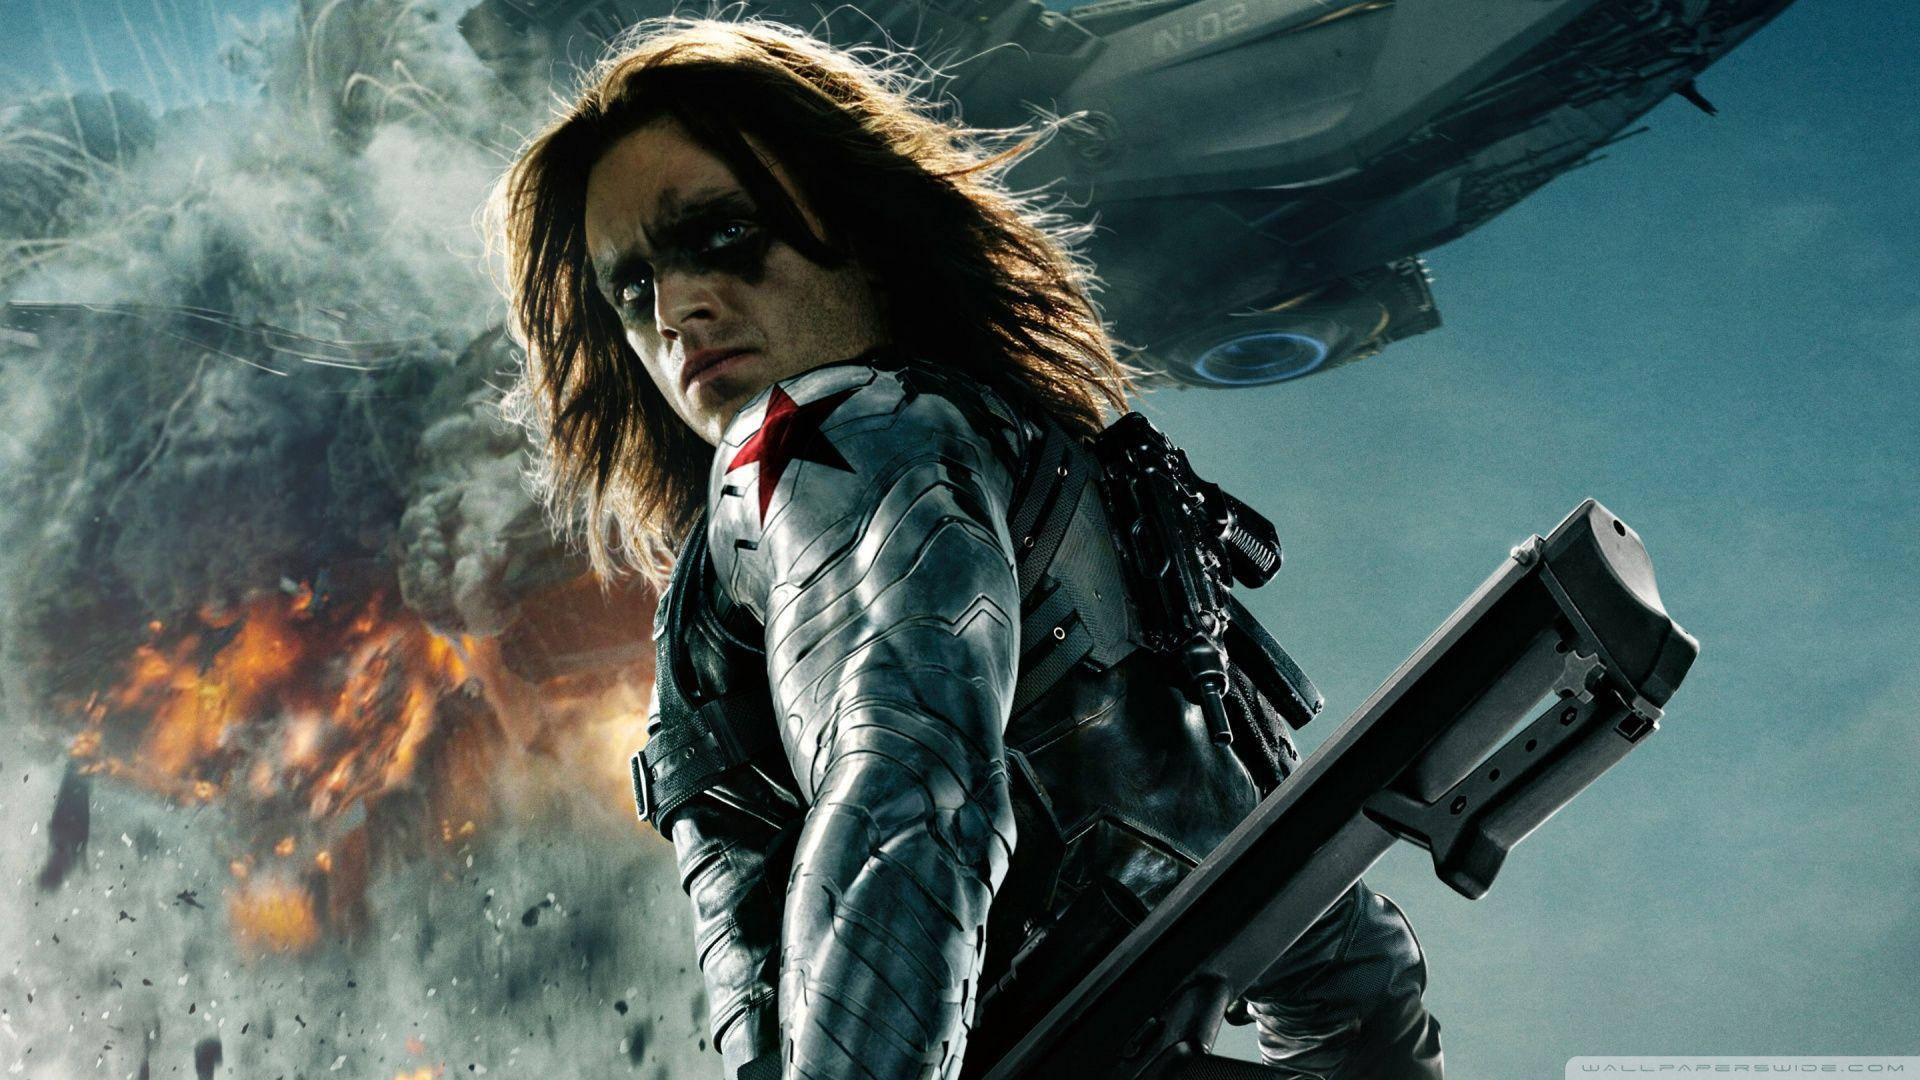 Bucky Barnes, known by his Winter Soldier identity, stares off into the horizon. Wallpaper